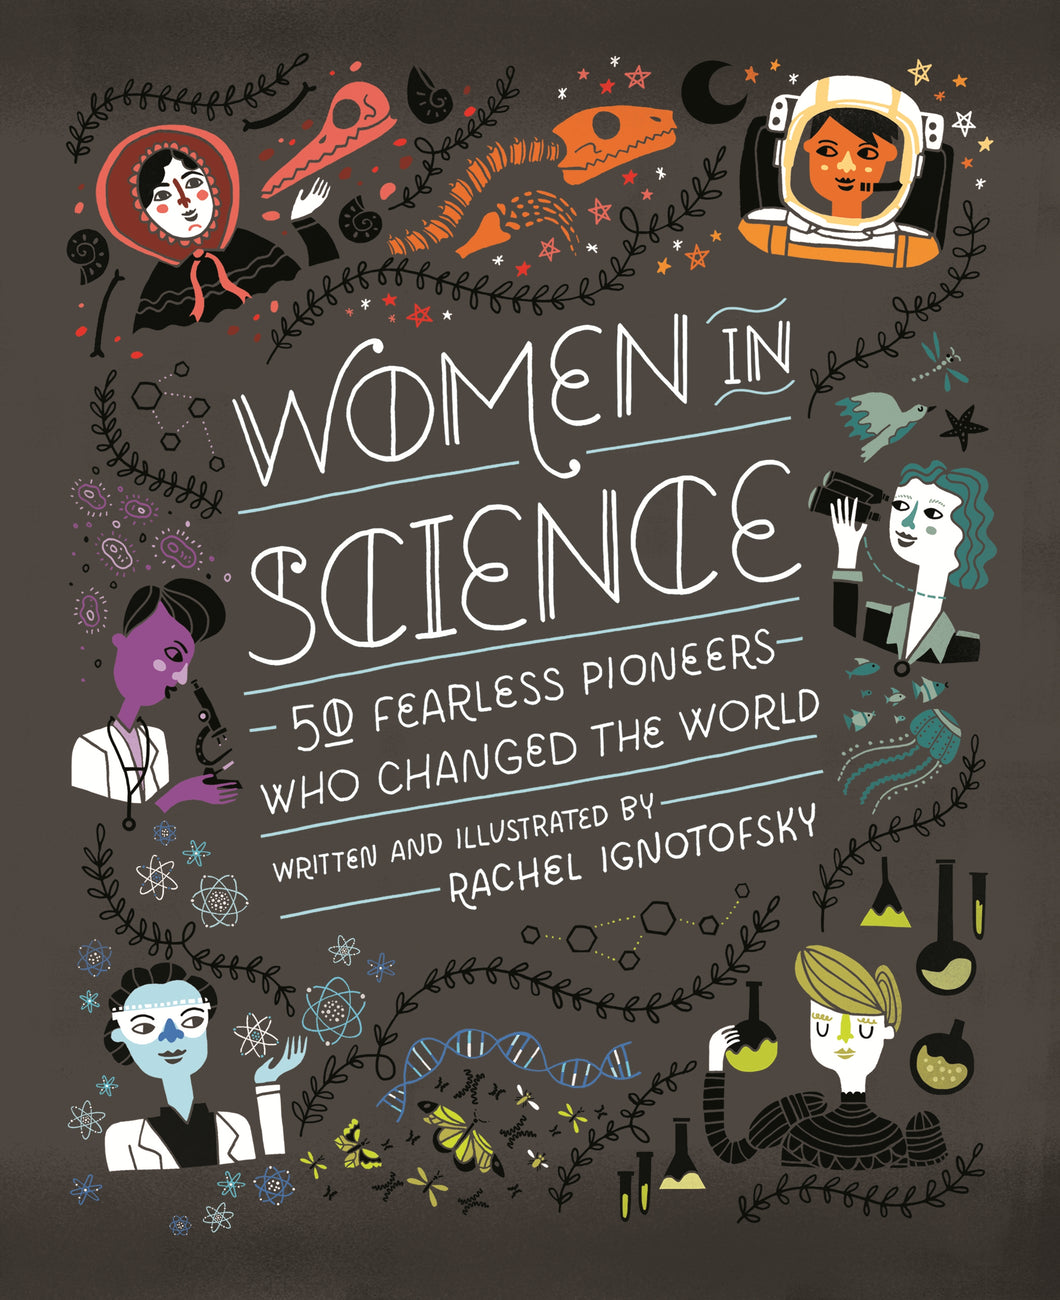 Front cover of the book reads 'Women in Science - 50 Fearless Pioneers who changed the world, written and illustrated by Rachel Ignotofsky'. The book is black with colourful illustrations of scientists. 